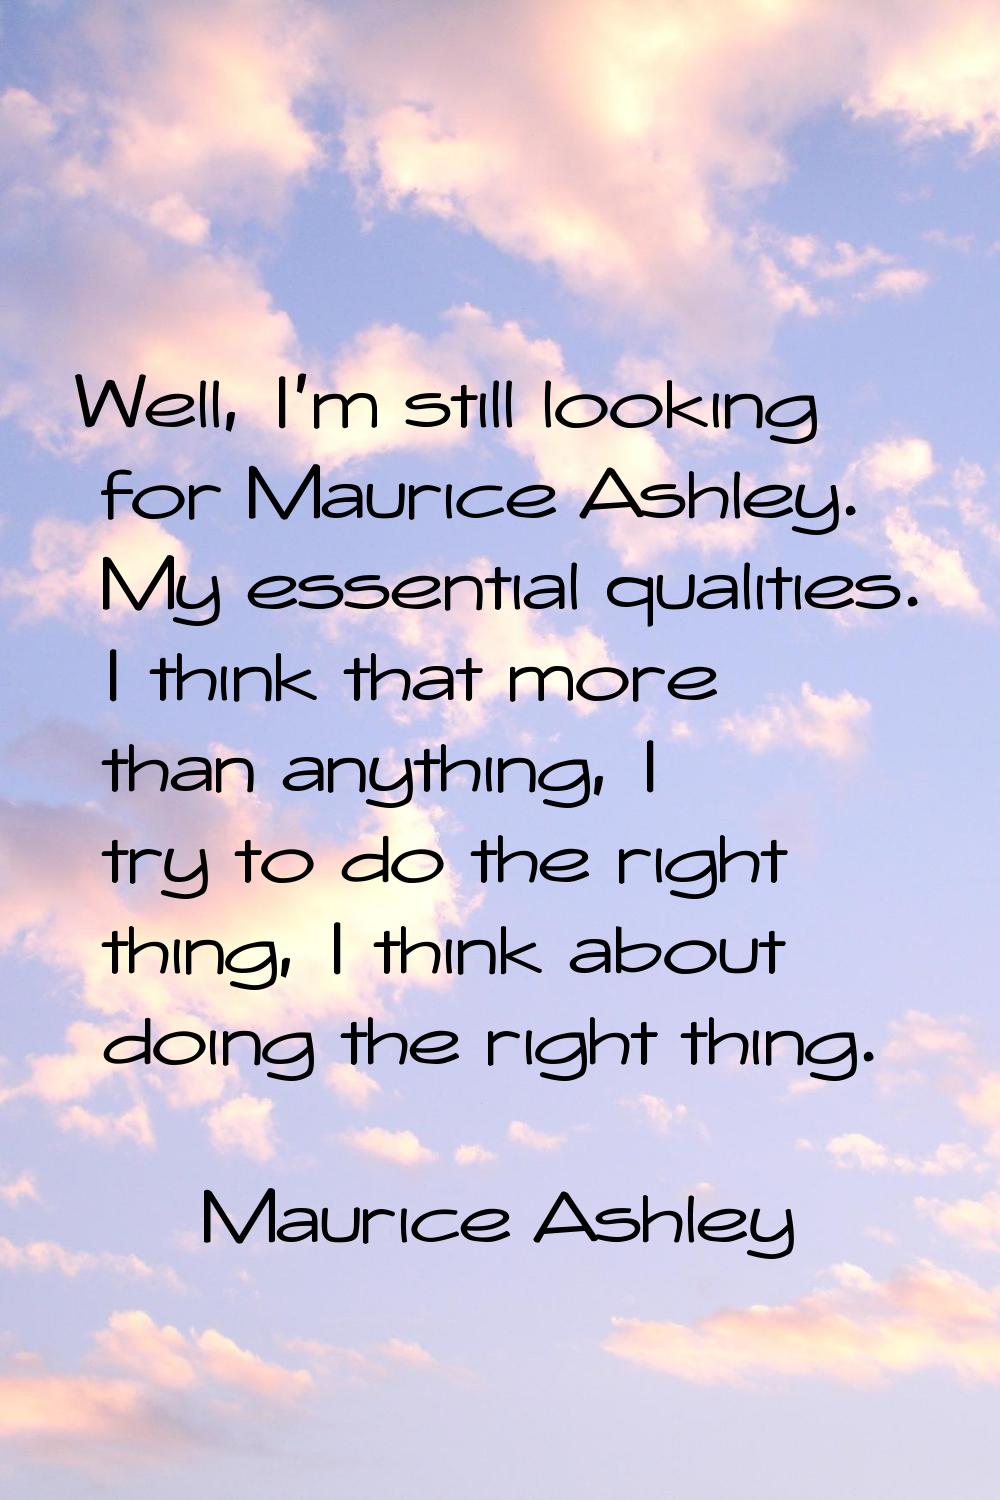 Well, I'm still looking for Maurice Ashley. My essential qualities. I think that more than anything